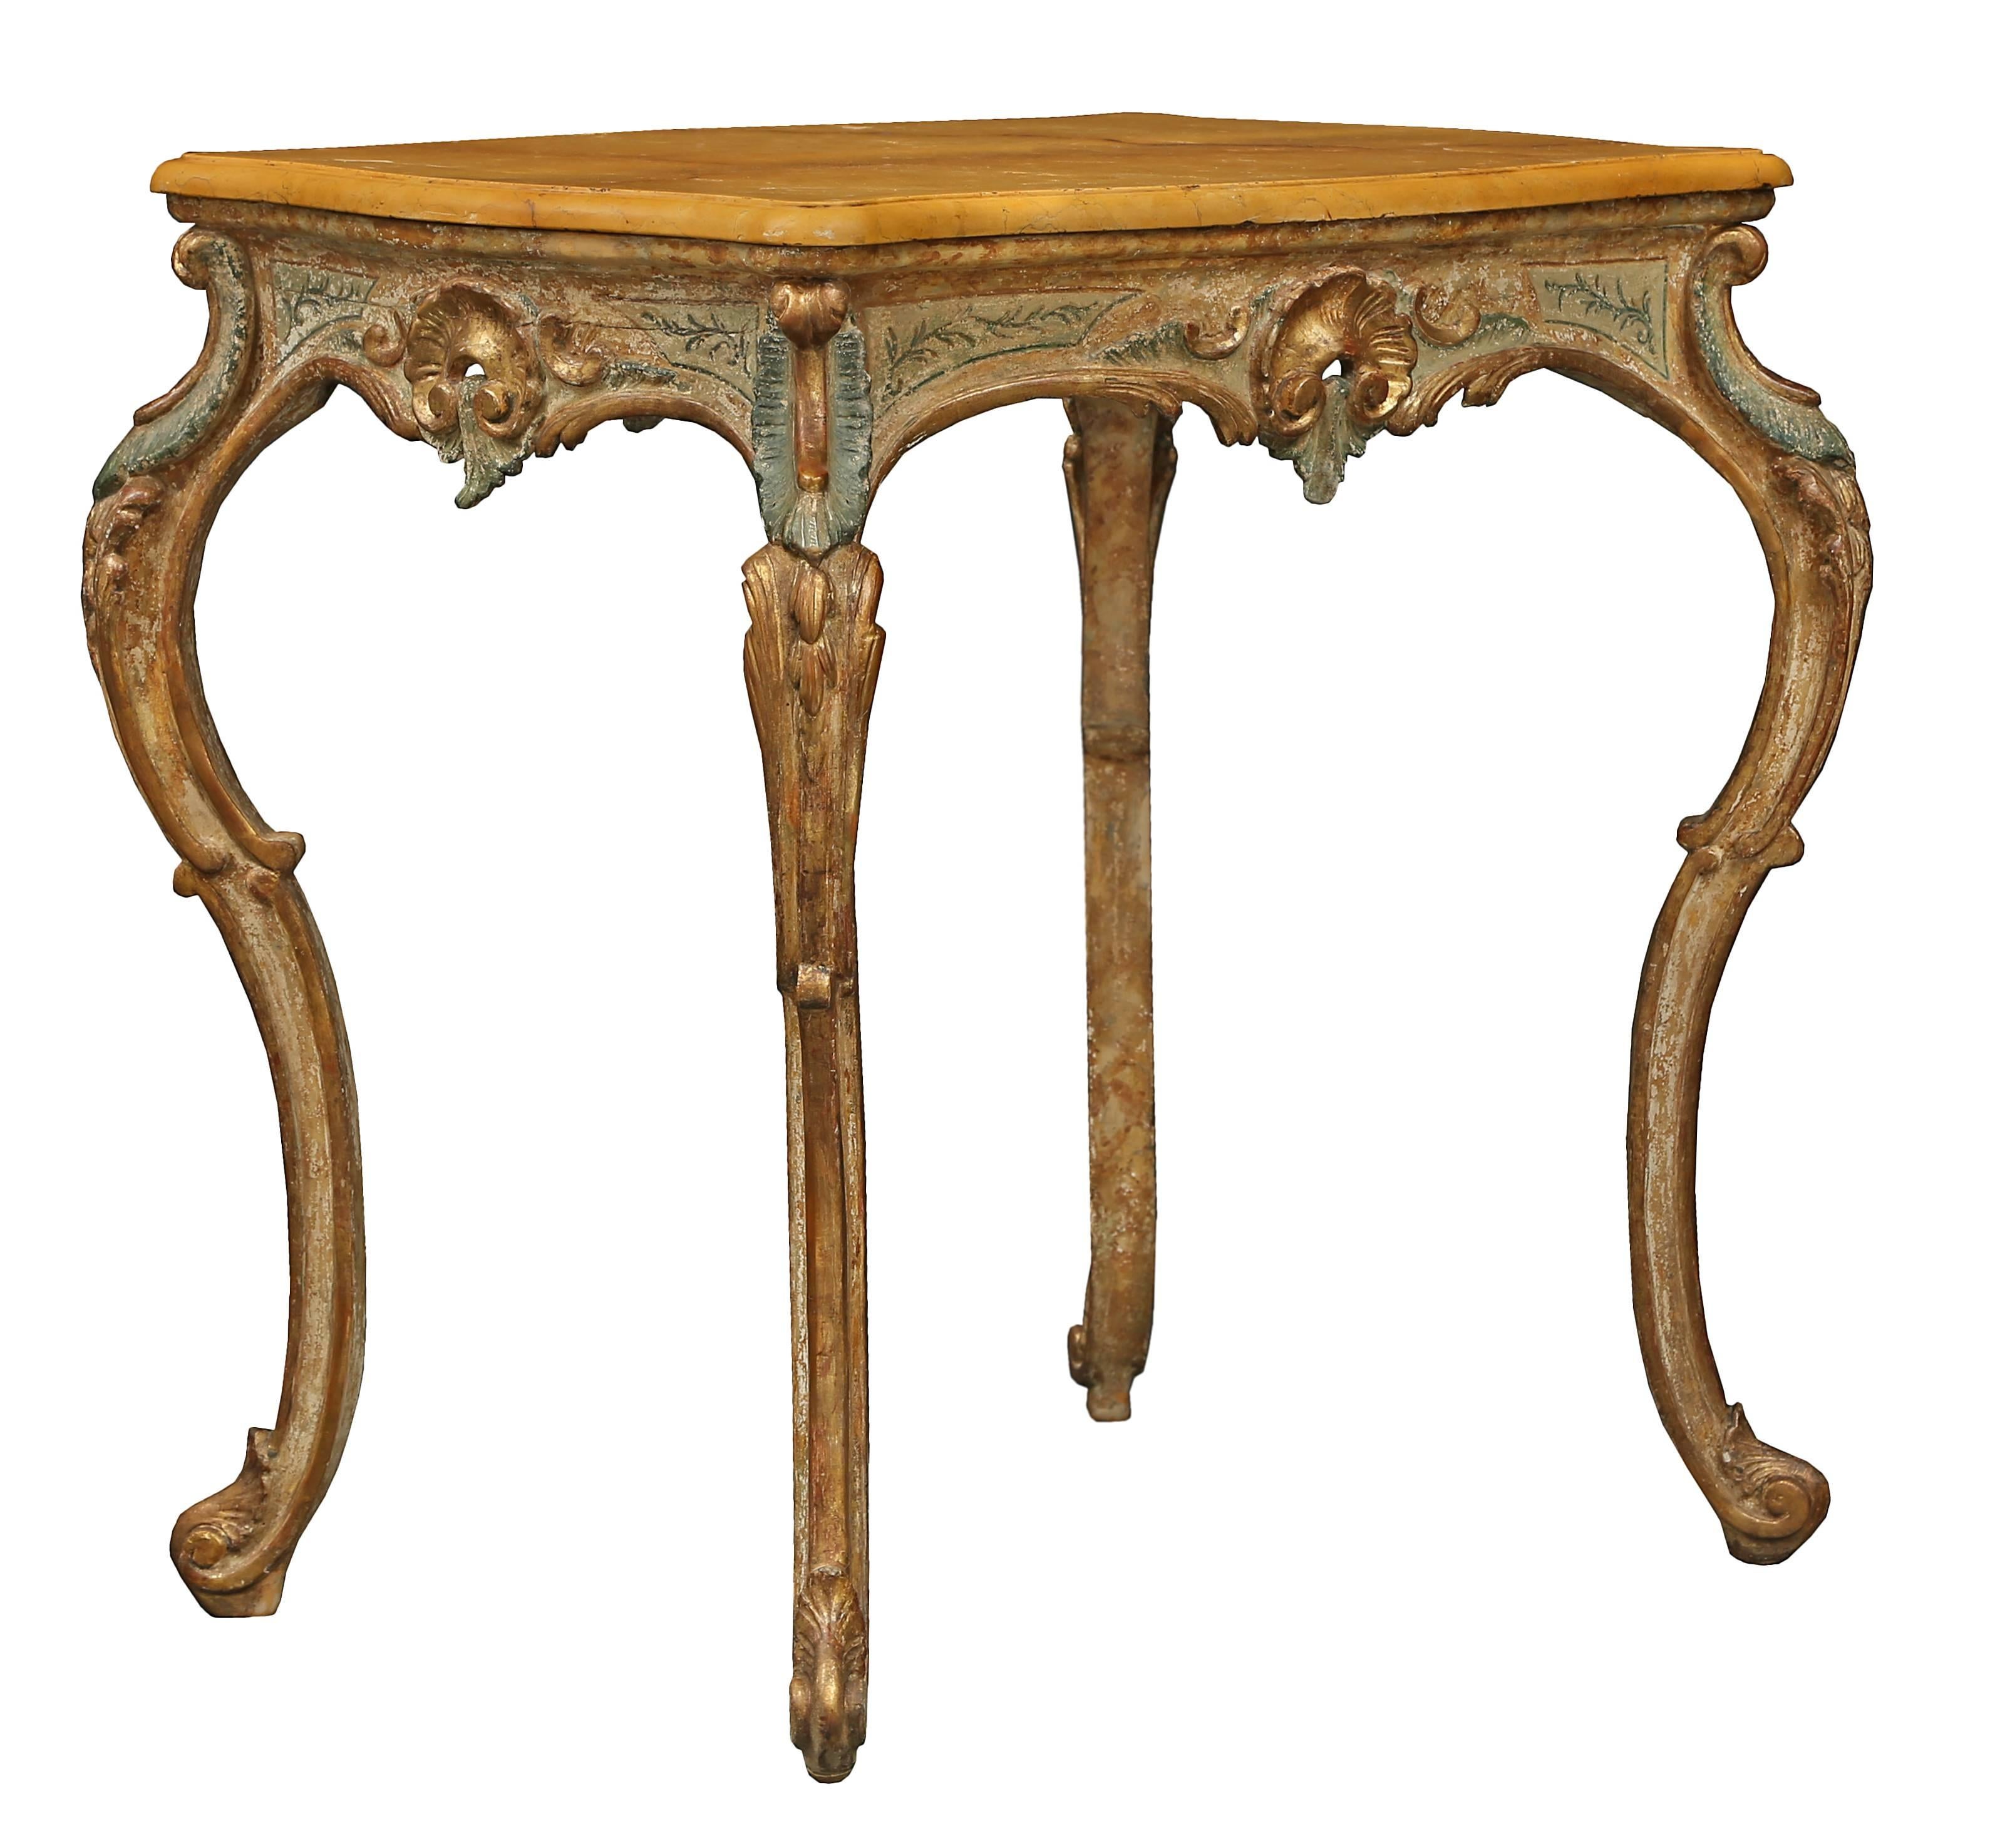 A lovely and very decorative Italian 18th century Louis XV period patinated side table. The side table with all original paint is raised on elegant slender carved cabriole legs with accents of giltwood acanthus leaves. At each side of the scrolled